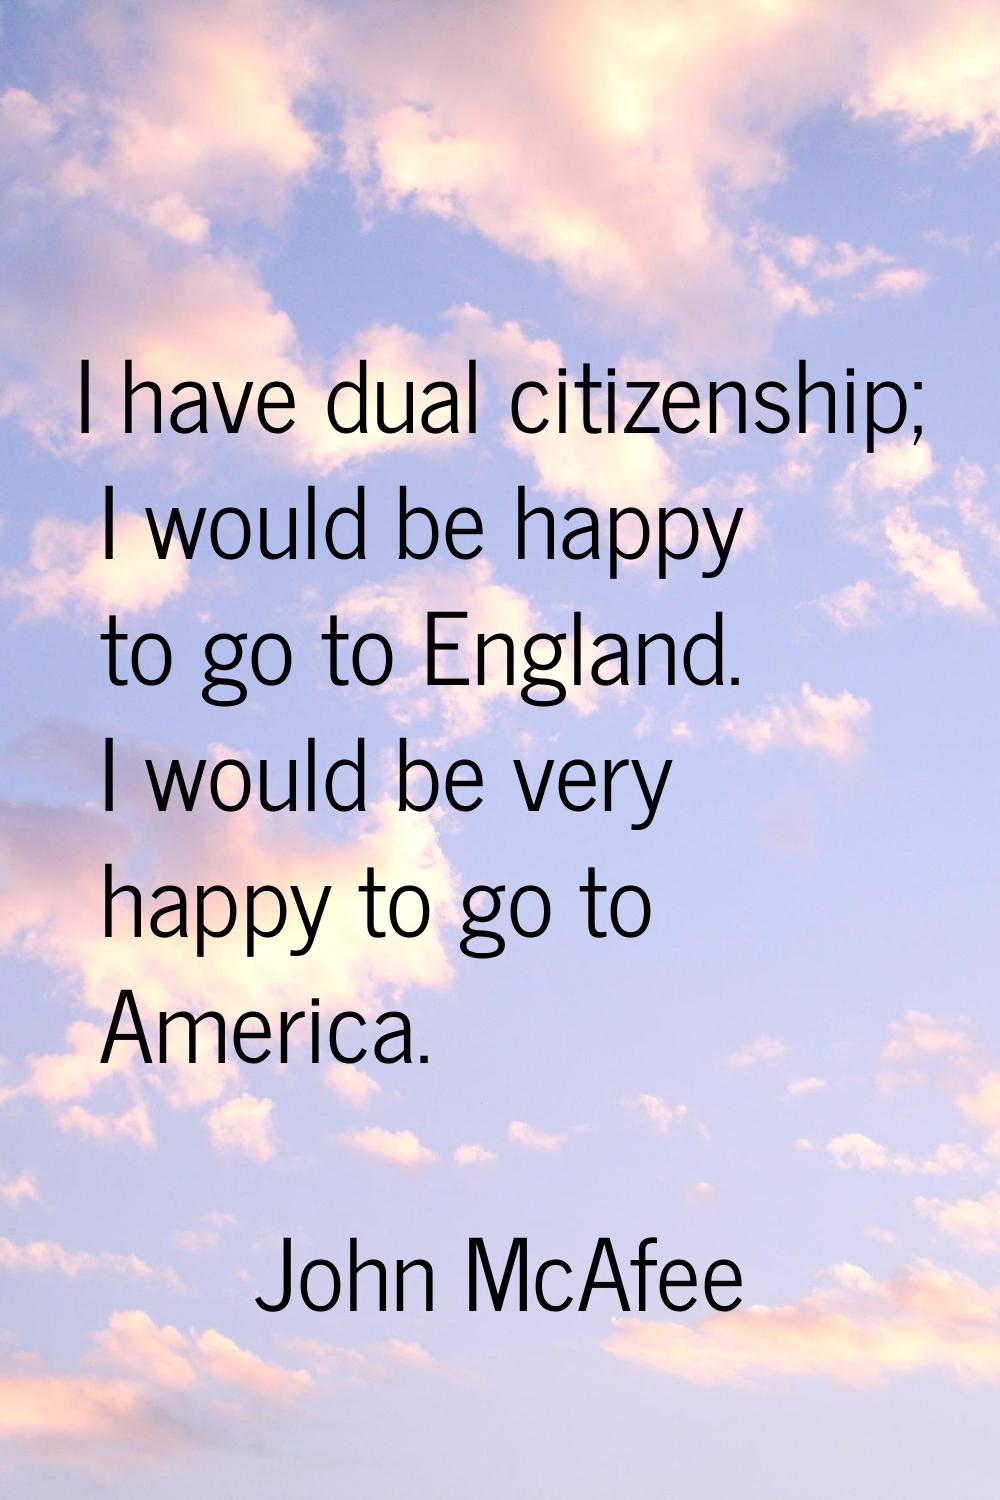 I have dual citizenship; I would be happy to go to England. I would be very happy to go to America.